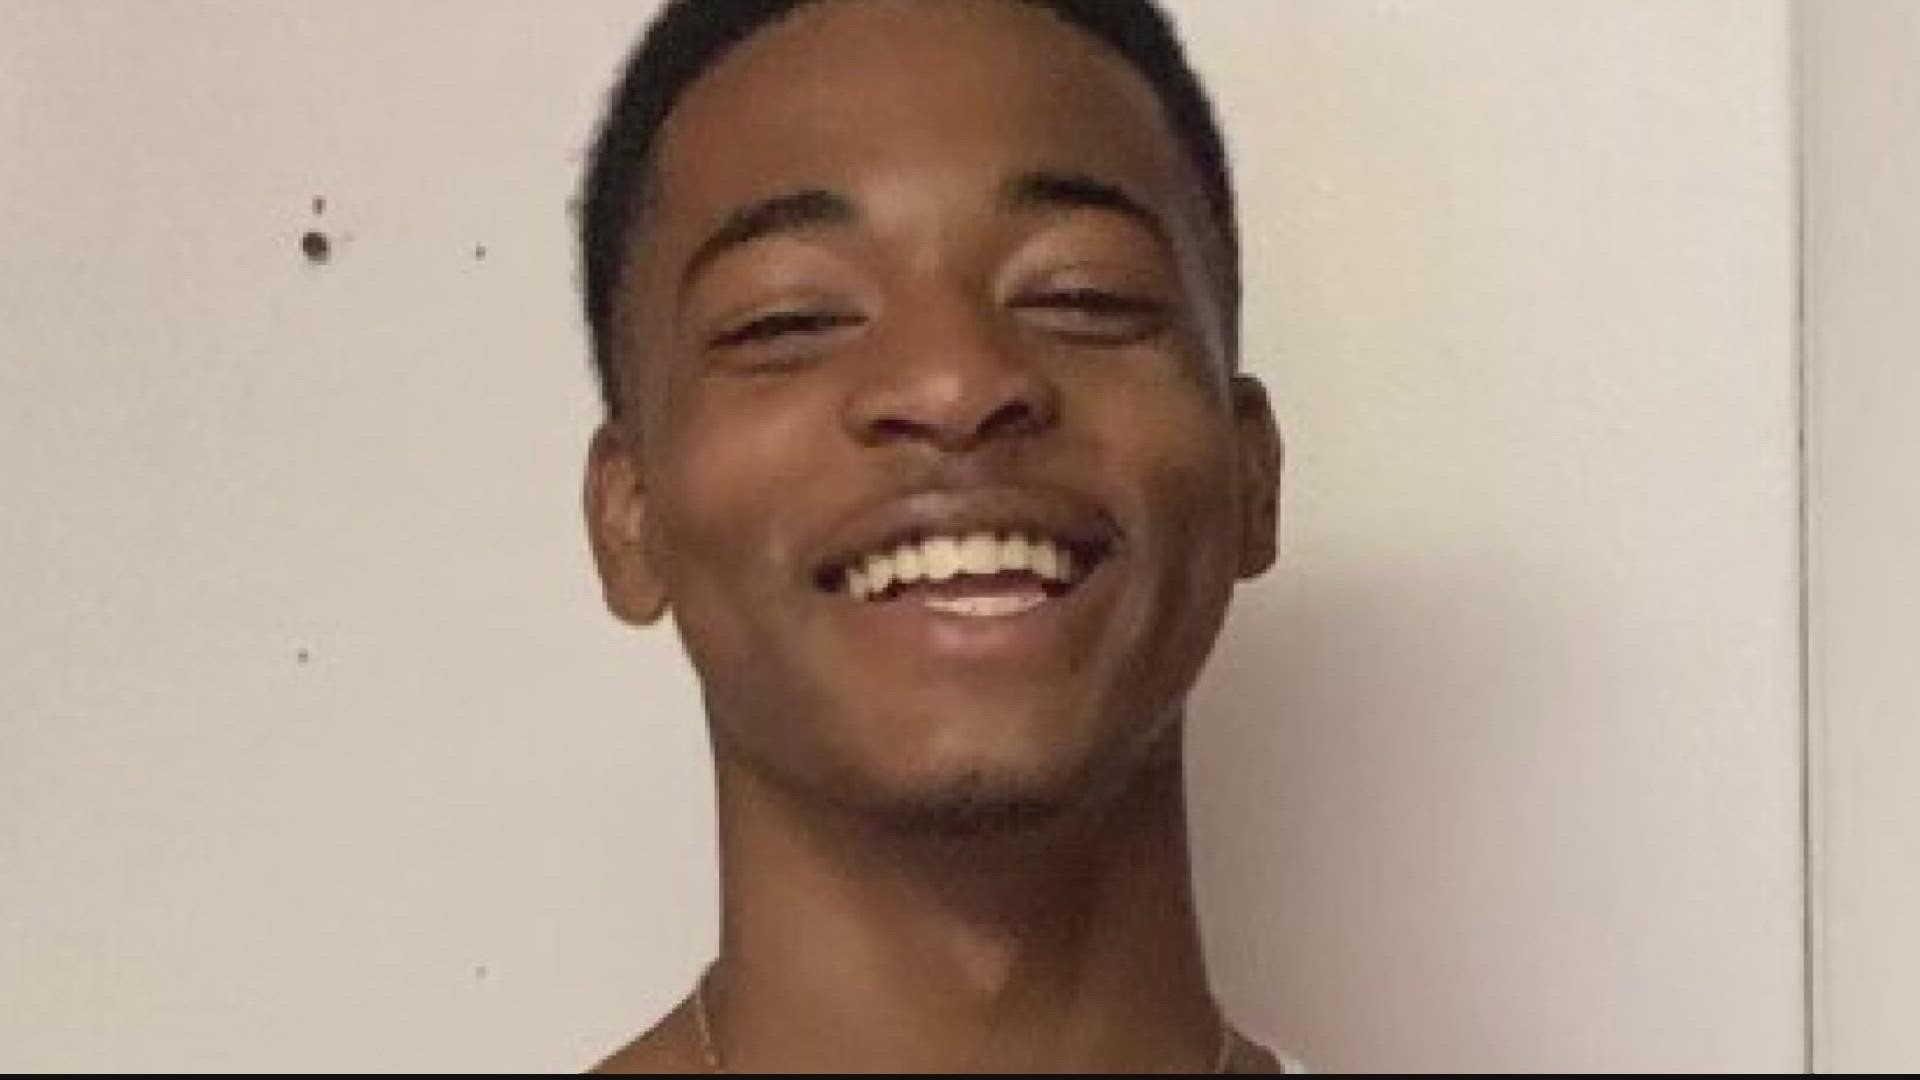 Police have arrested a 24-year-old man in connection to the death of a 17-year-old boy who was reported missing in 2020.